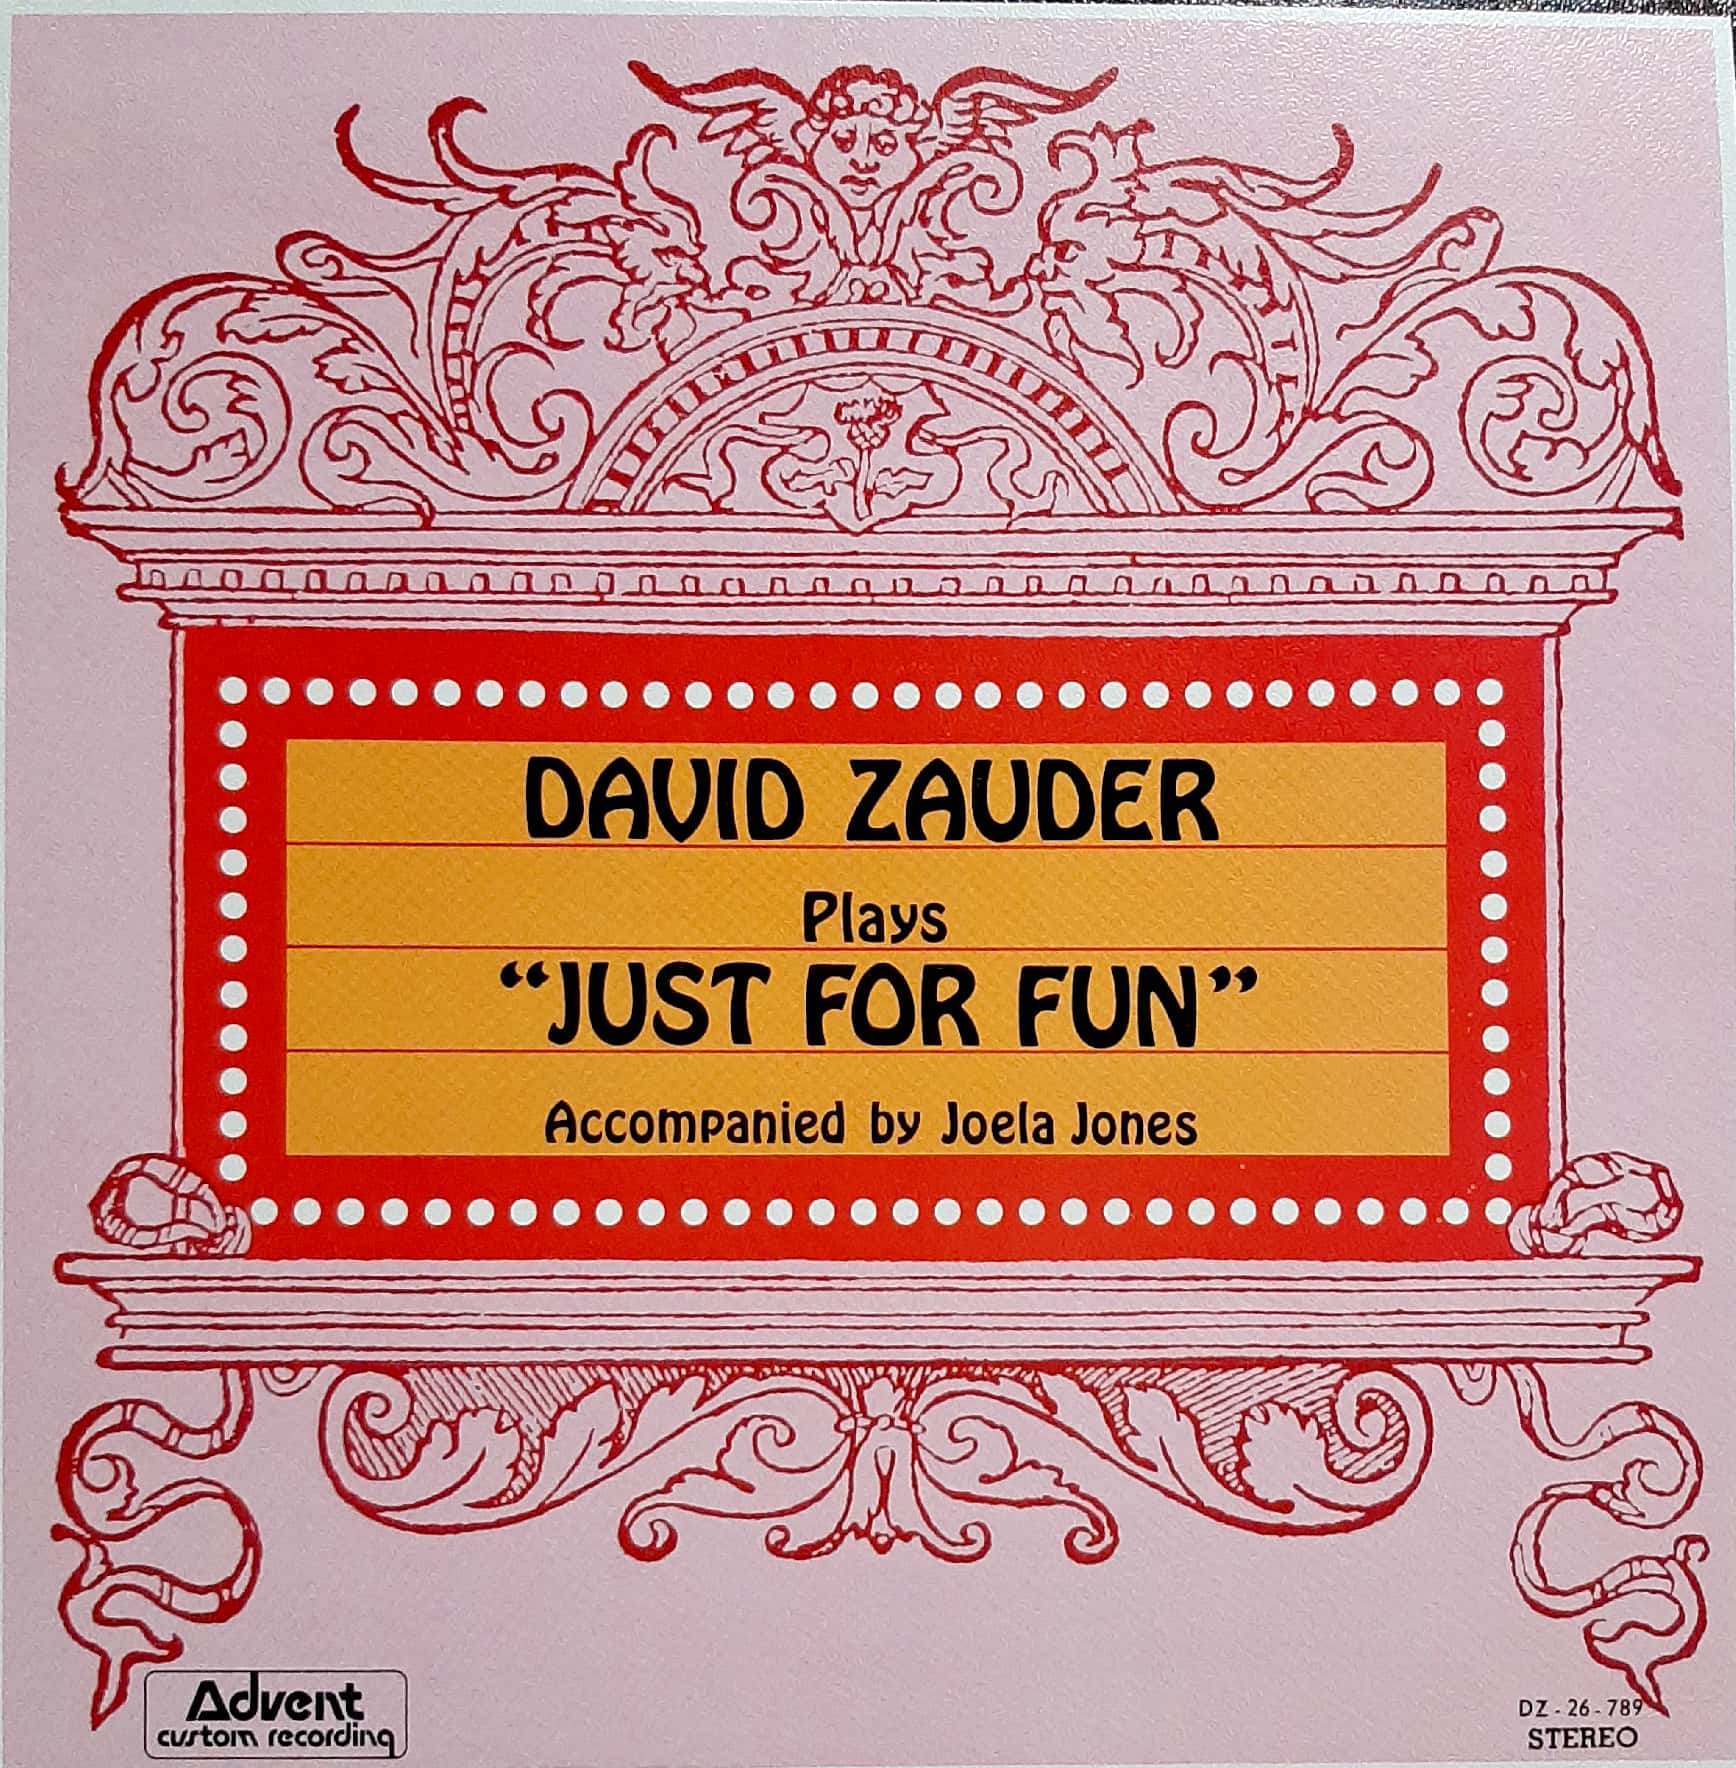 The Record version of David Zauder plays just for fun.